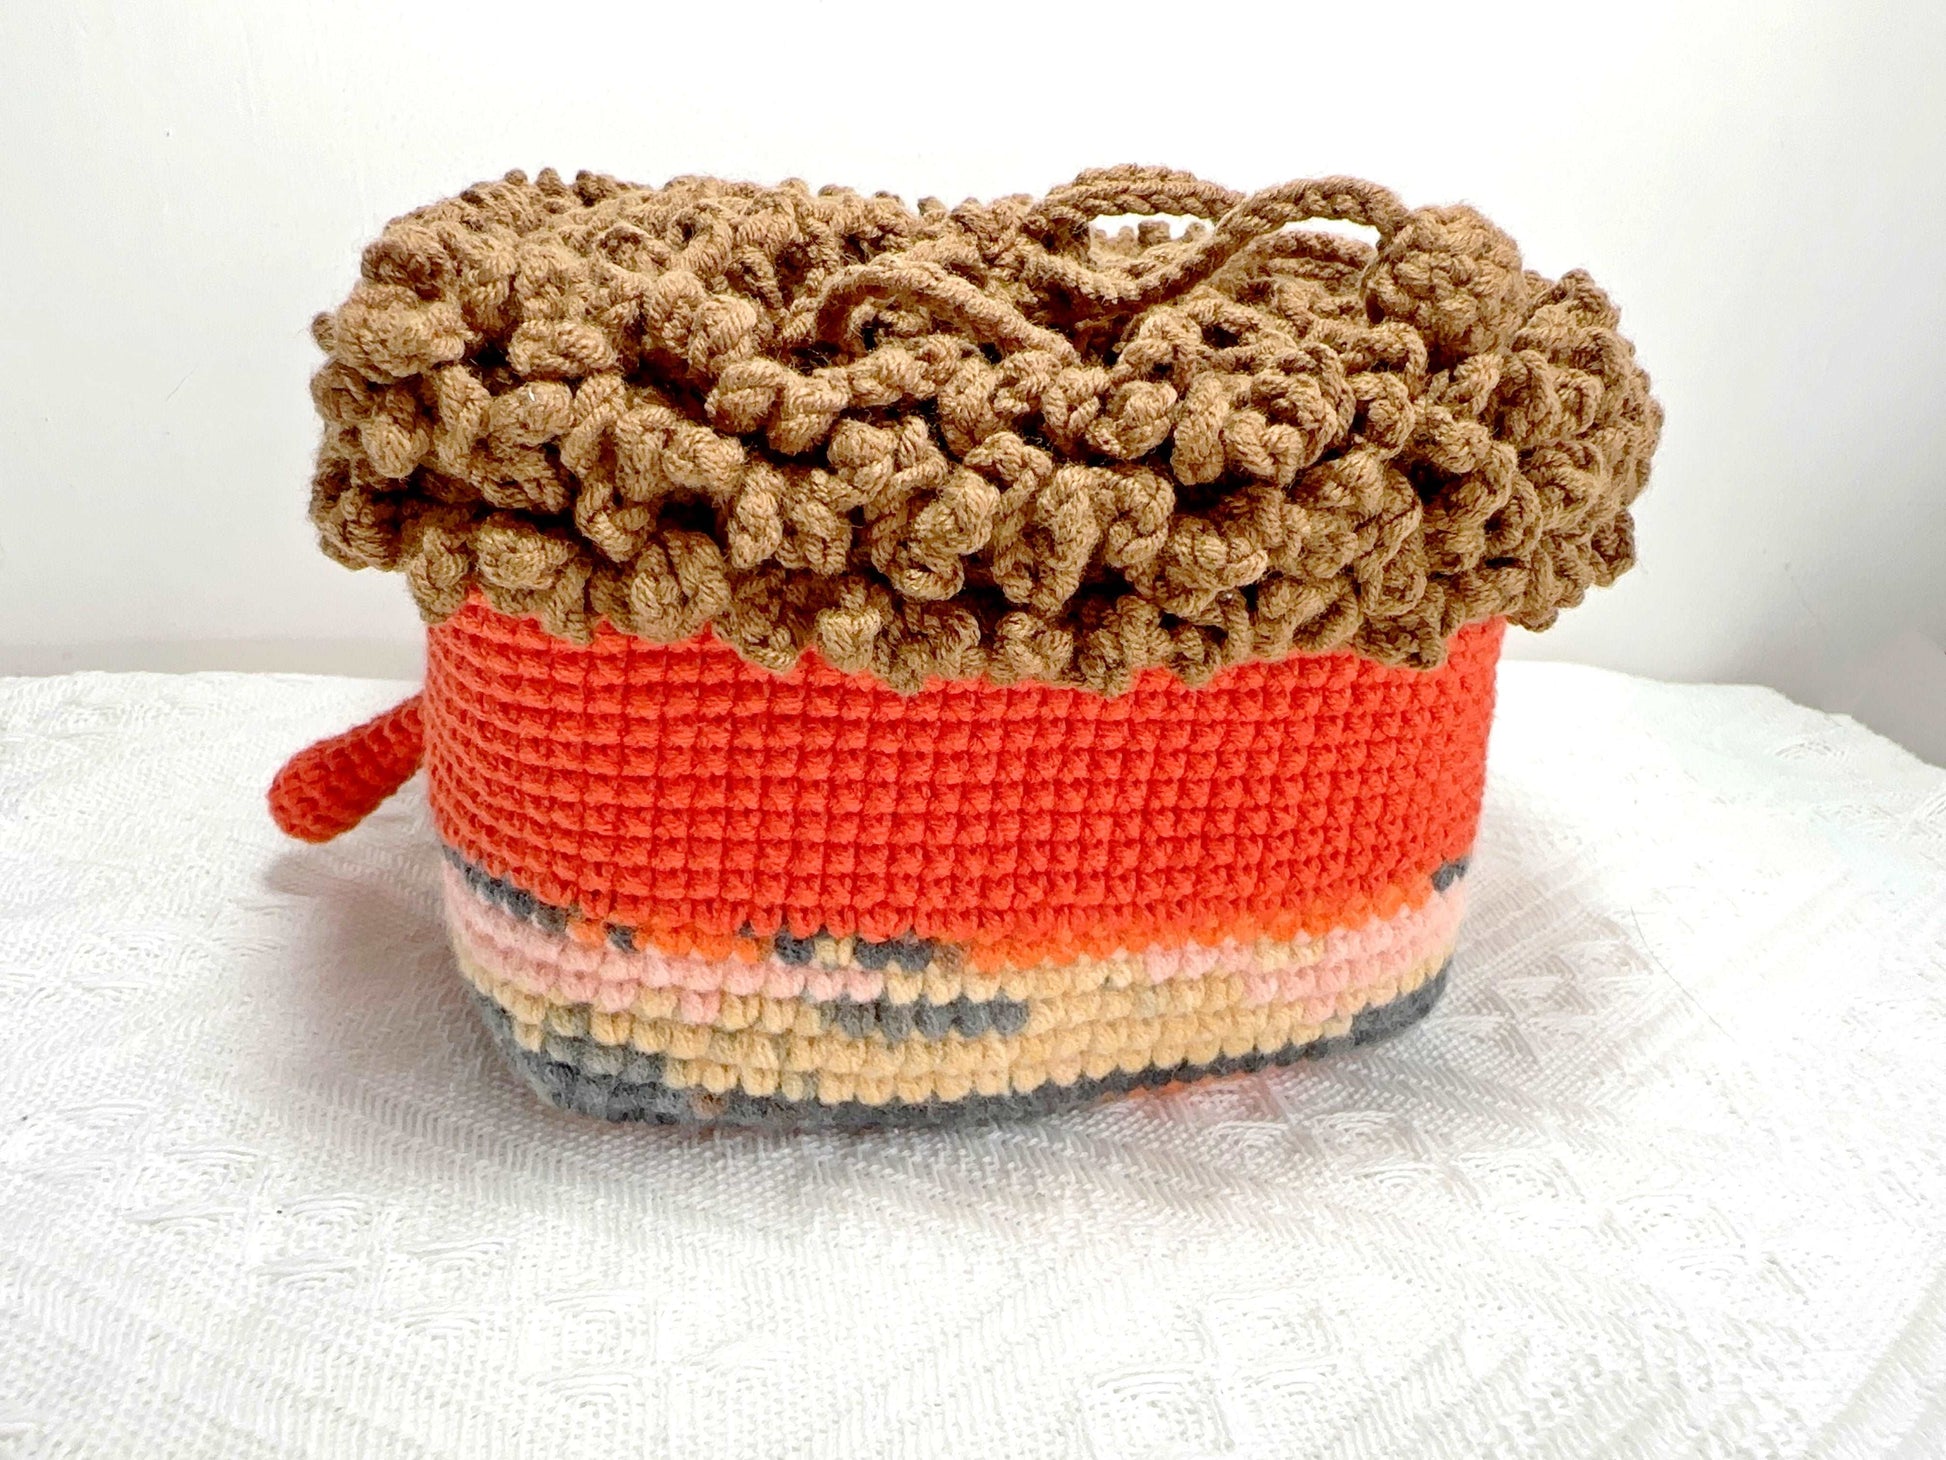 Stylish Handmade Knitted Red Mouth-Shaped Tissue Box Holder